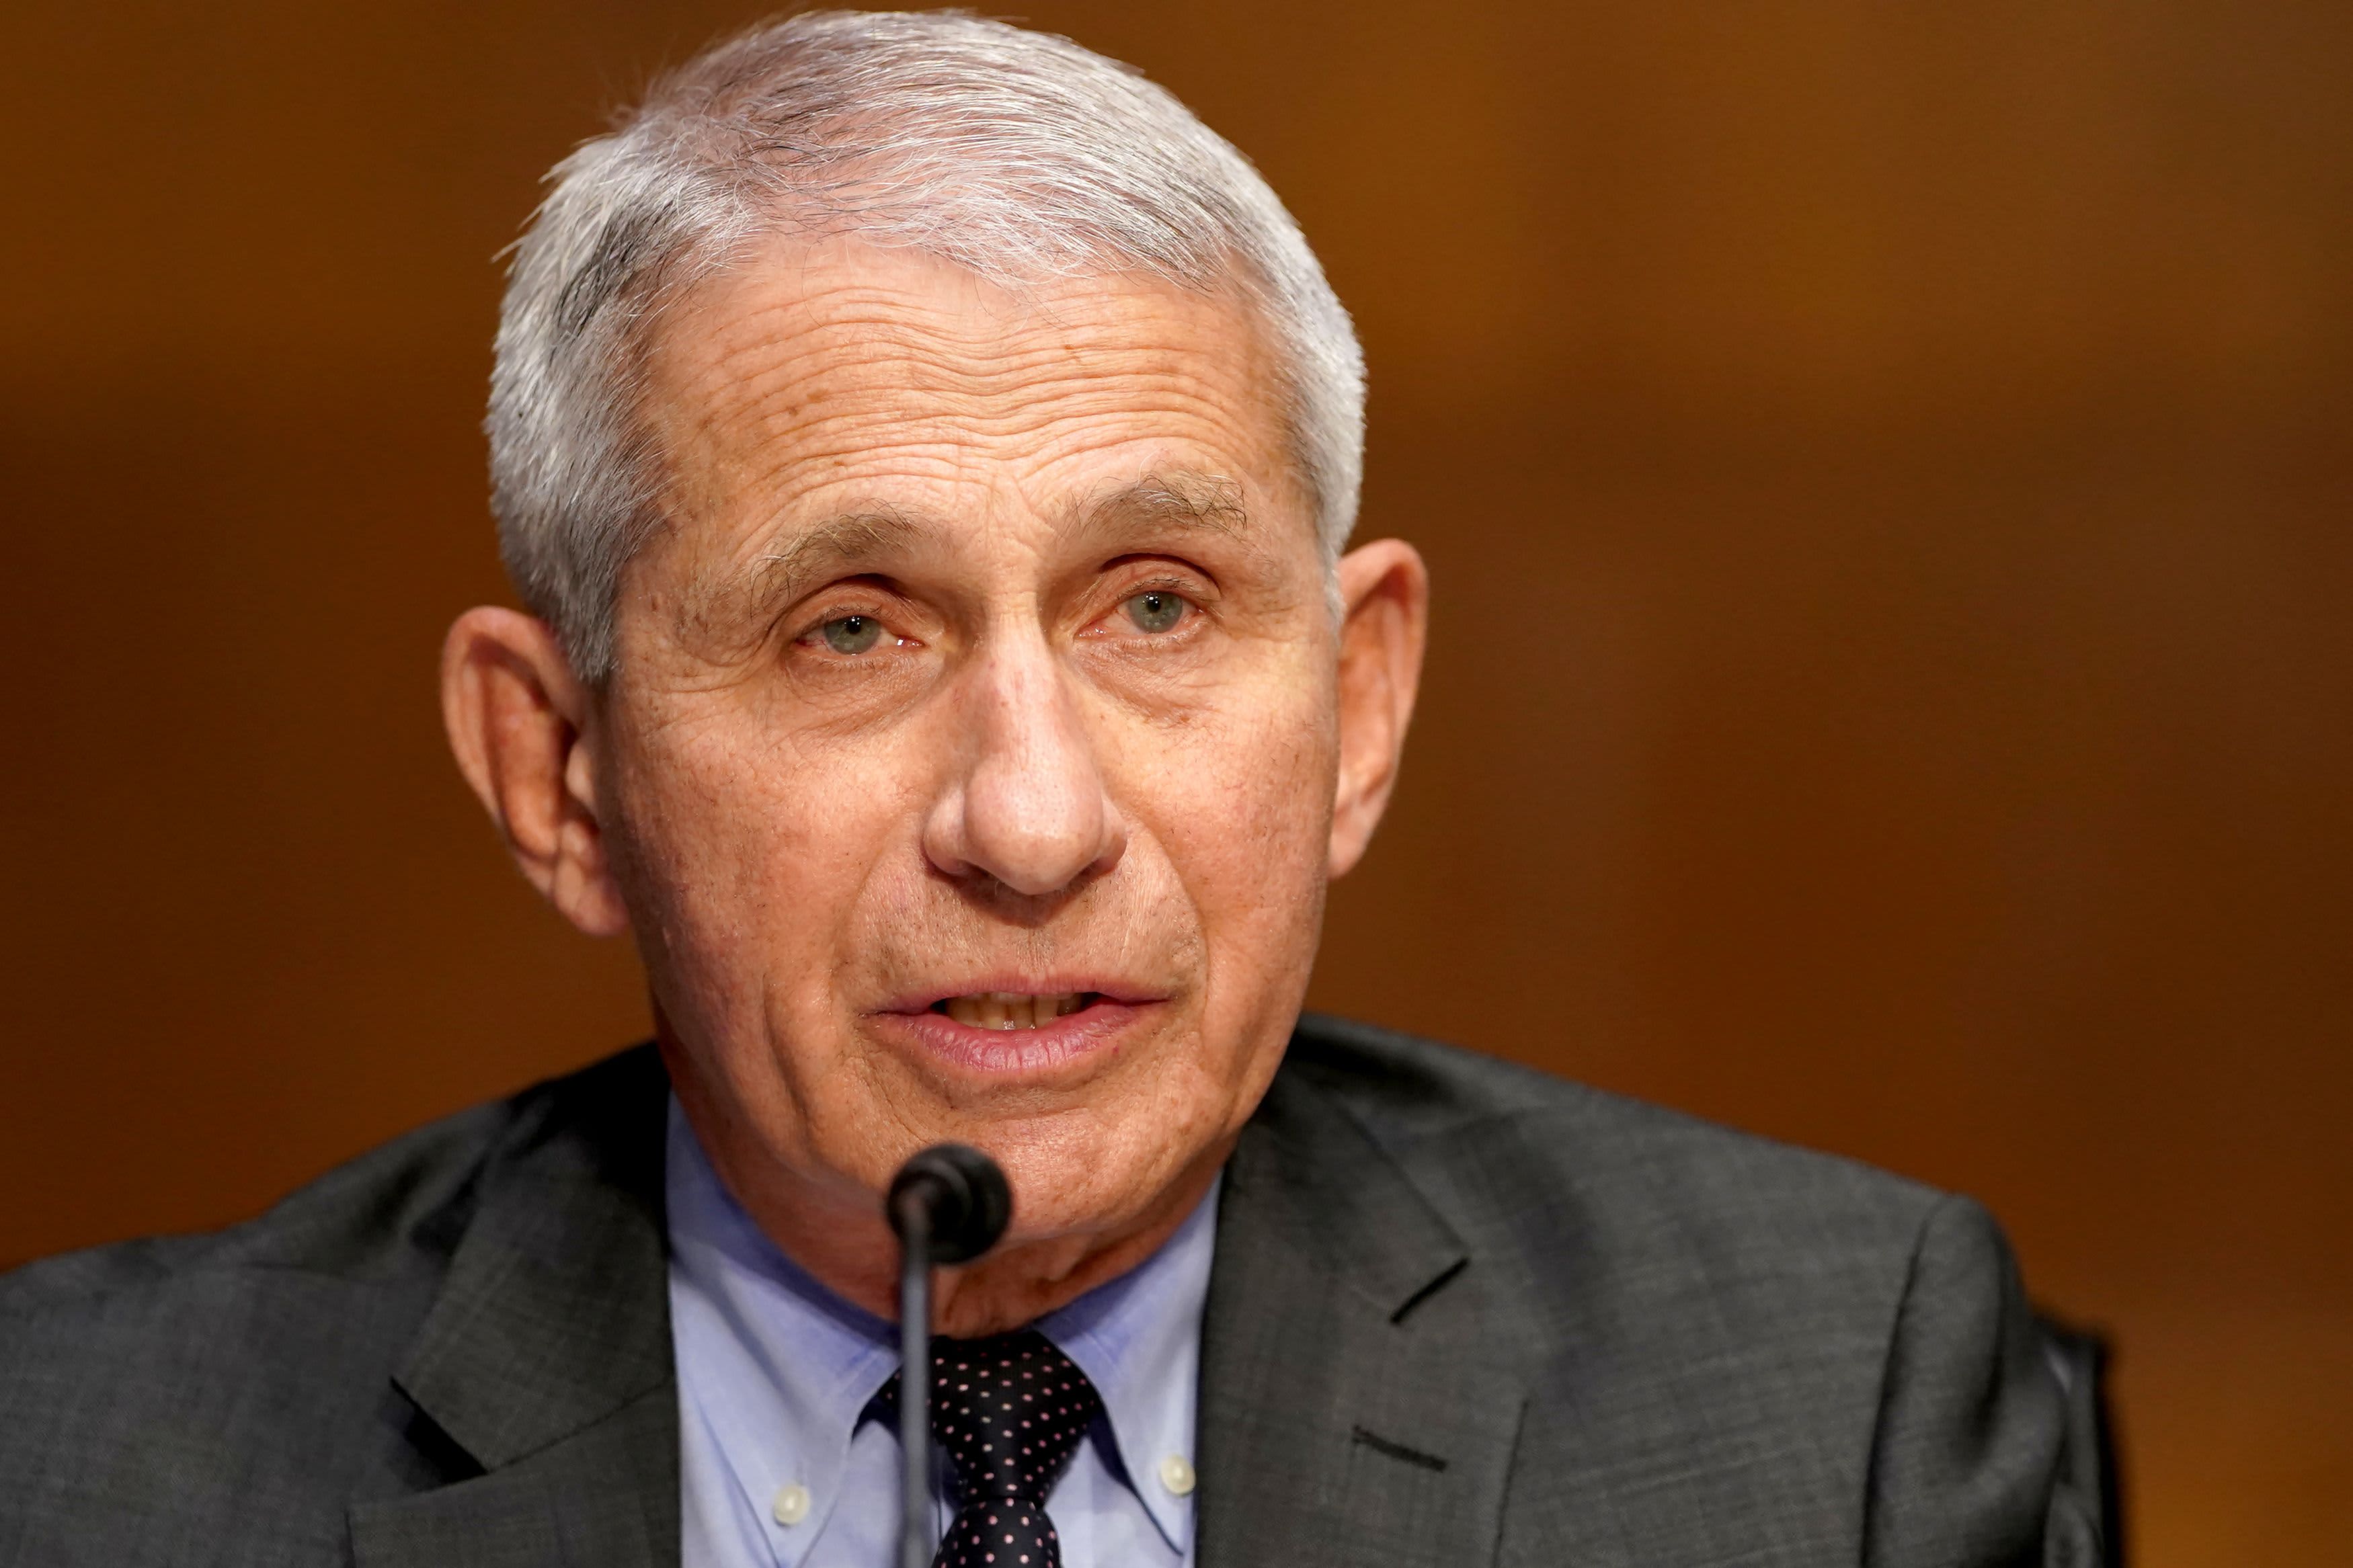 fauci-says-he-hopes-u-s-will-have-some-good-control-by-spring-2022